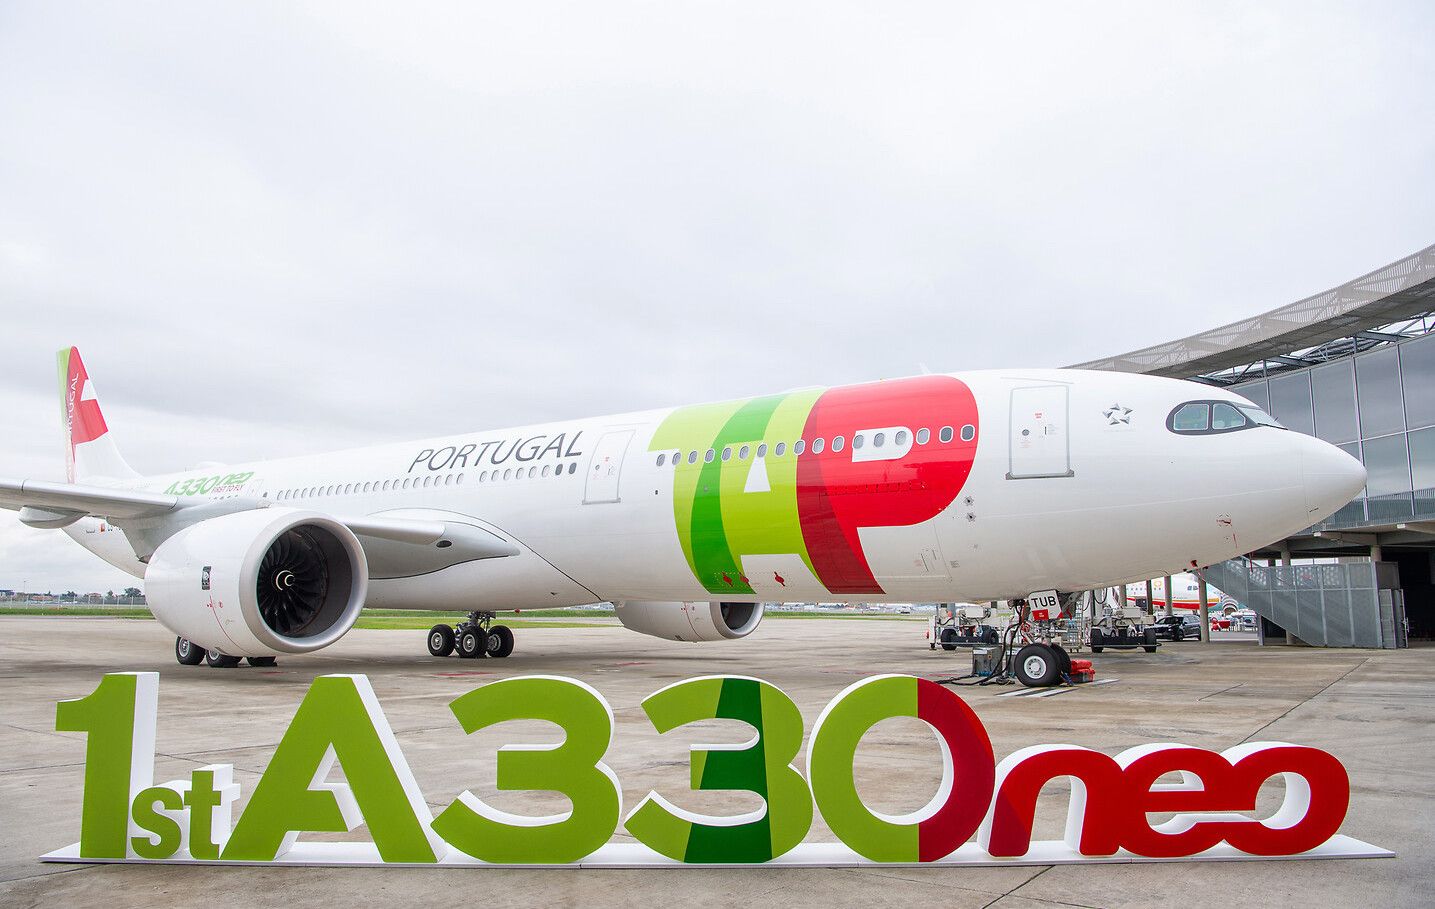 tap a330-900 first delivery